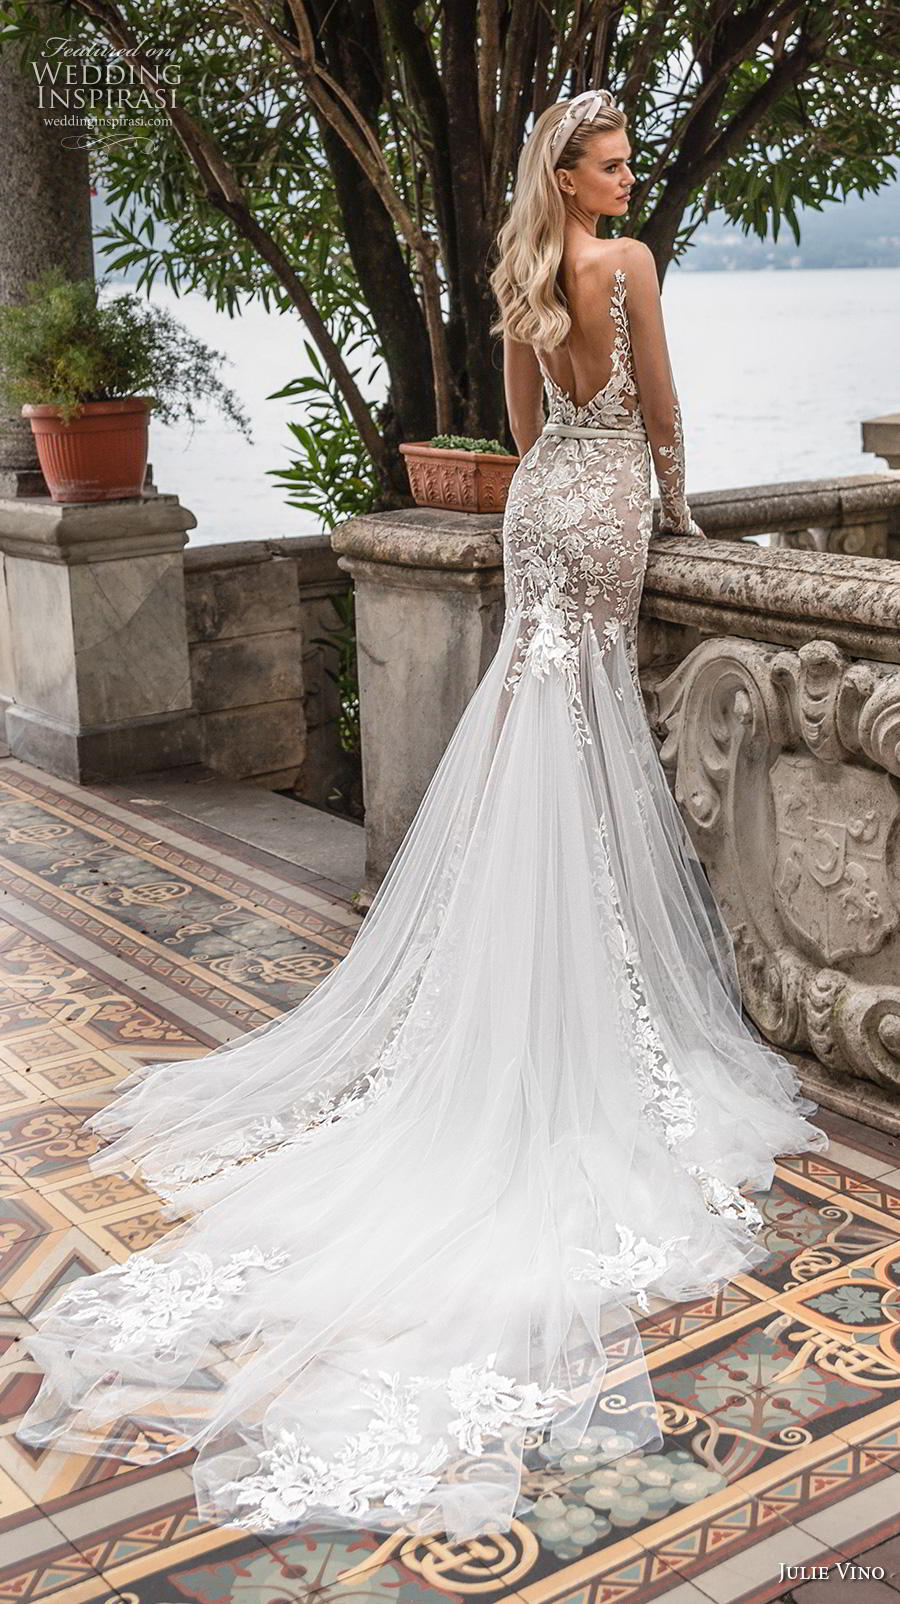 julie vino 2020 bellagio bridal long sleeves deep plunging v neck full embellishment sexy romantic fit and flare mermaid wedding dress backless low back chapel train (5) bv